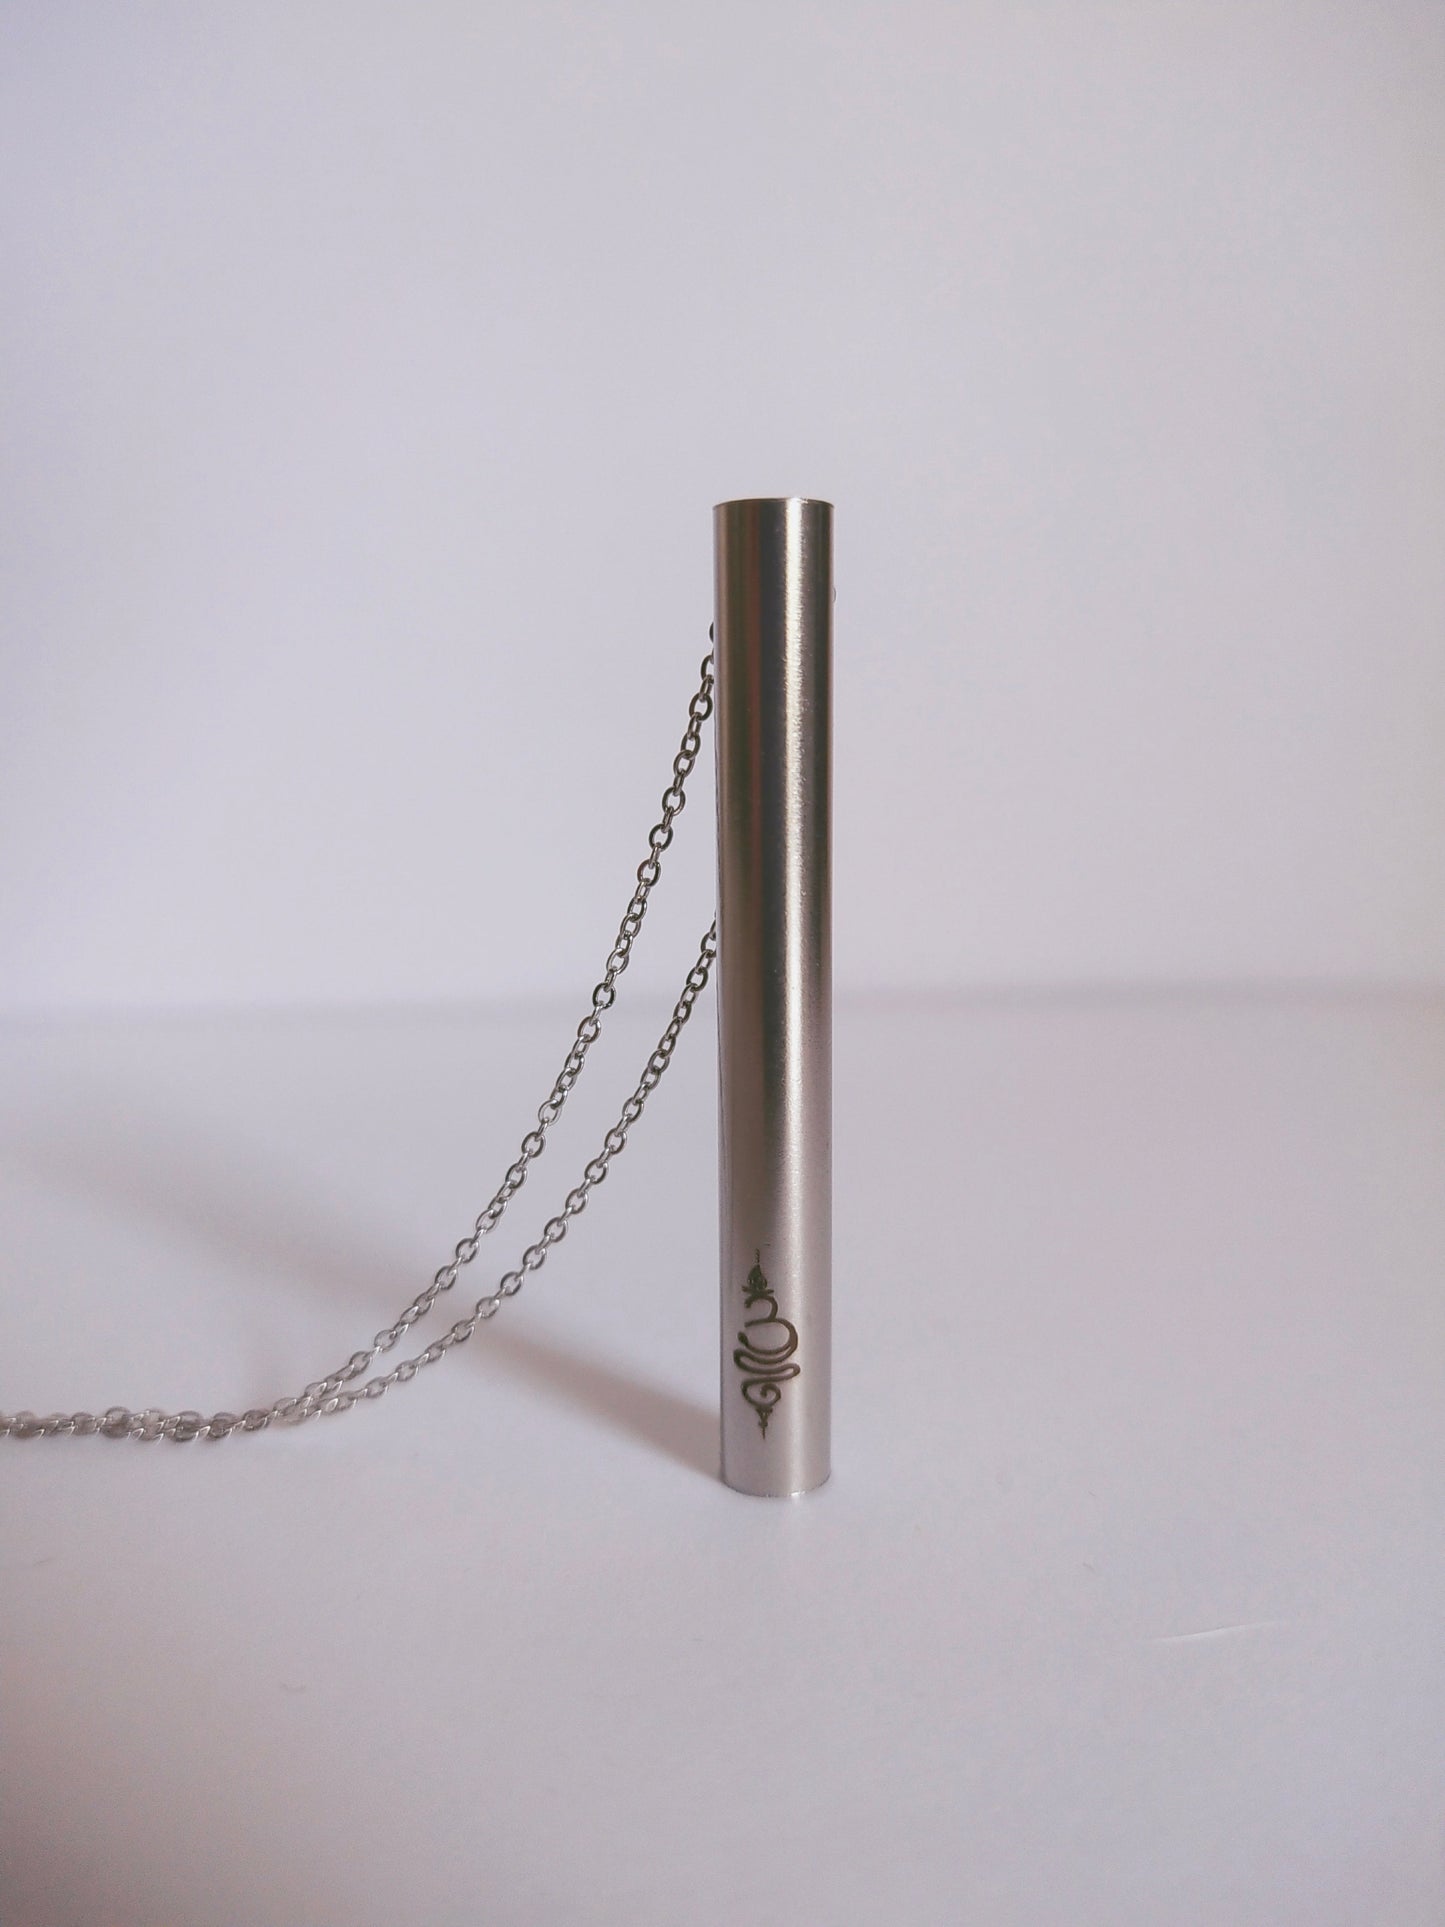 Stop Vaping Necklace -Anxiety Relief Breathing Necklace  Stainless Steel Silver Colour - Without Box - BreatheBuddy